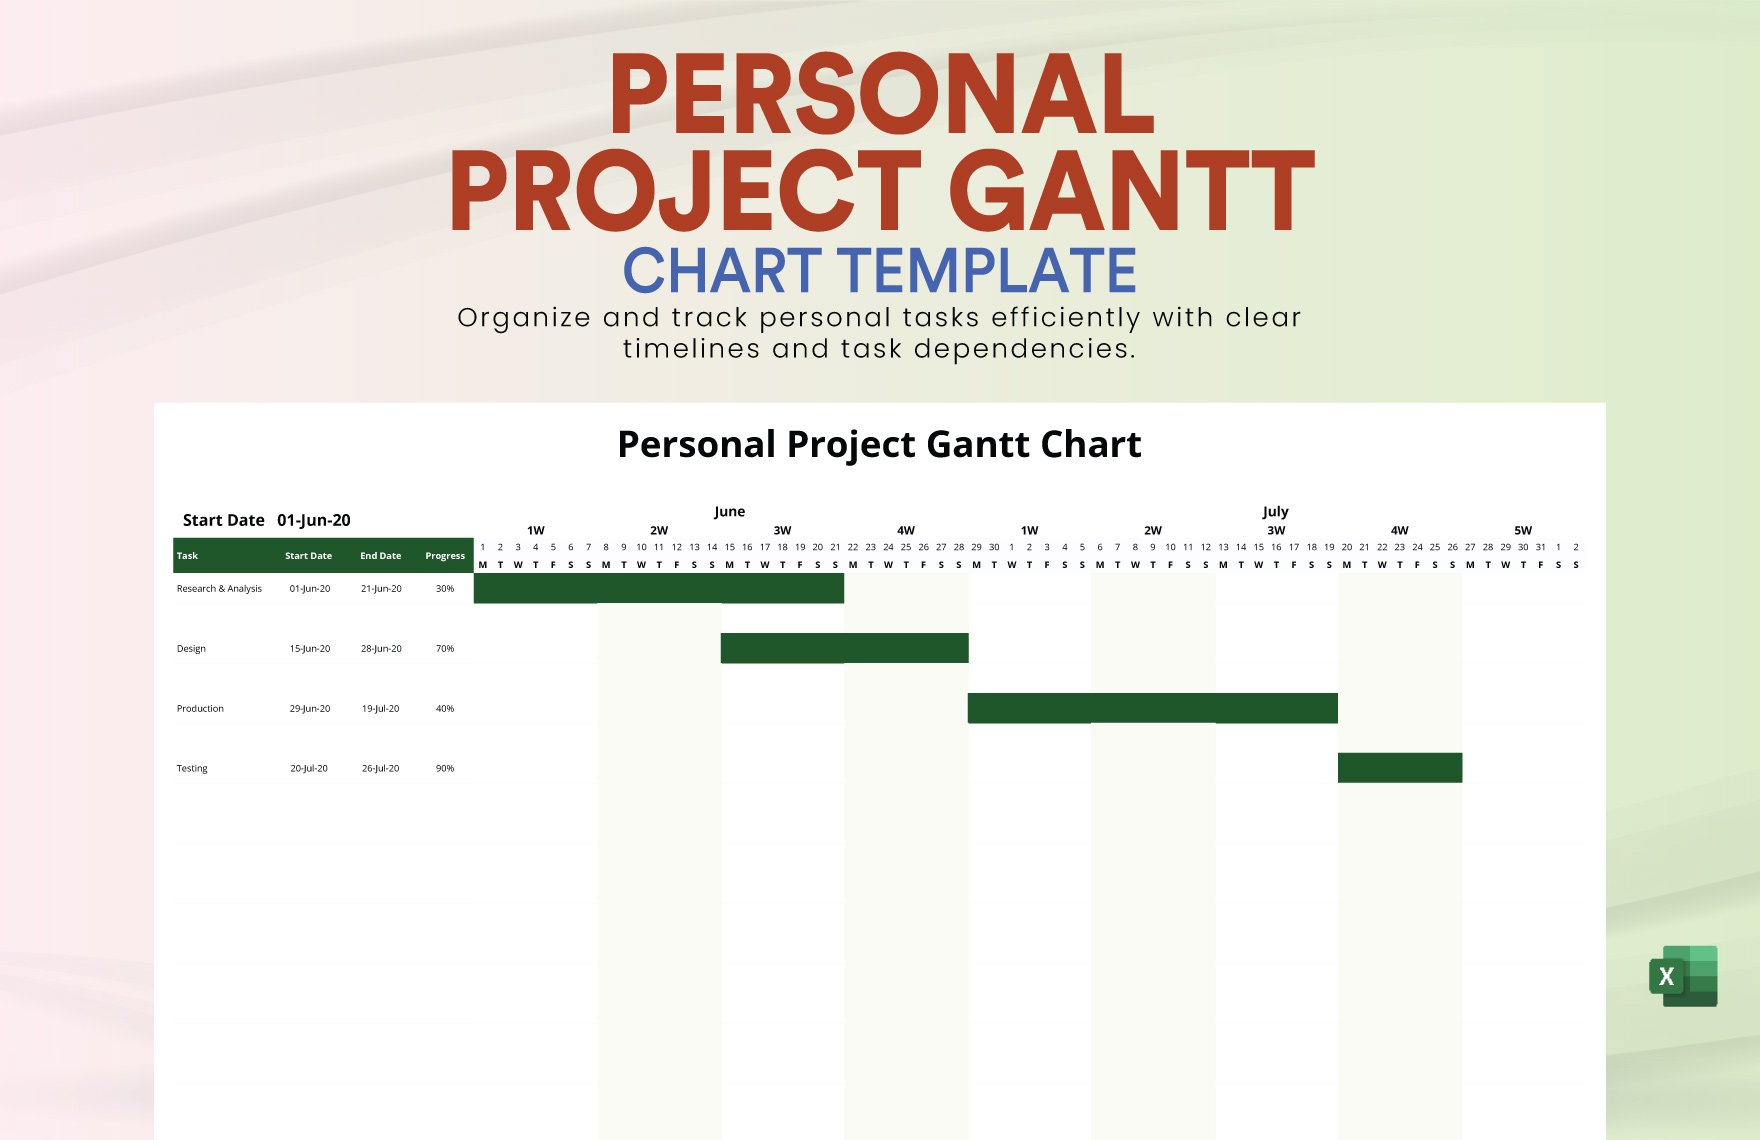 Personal Project Gantt Chart Template in Excel